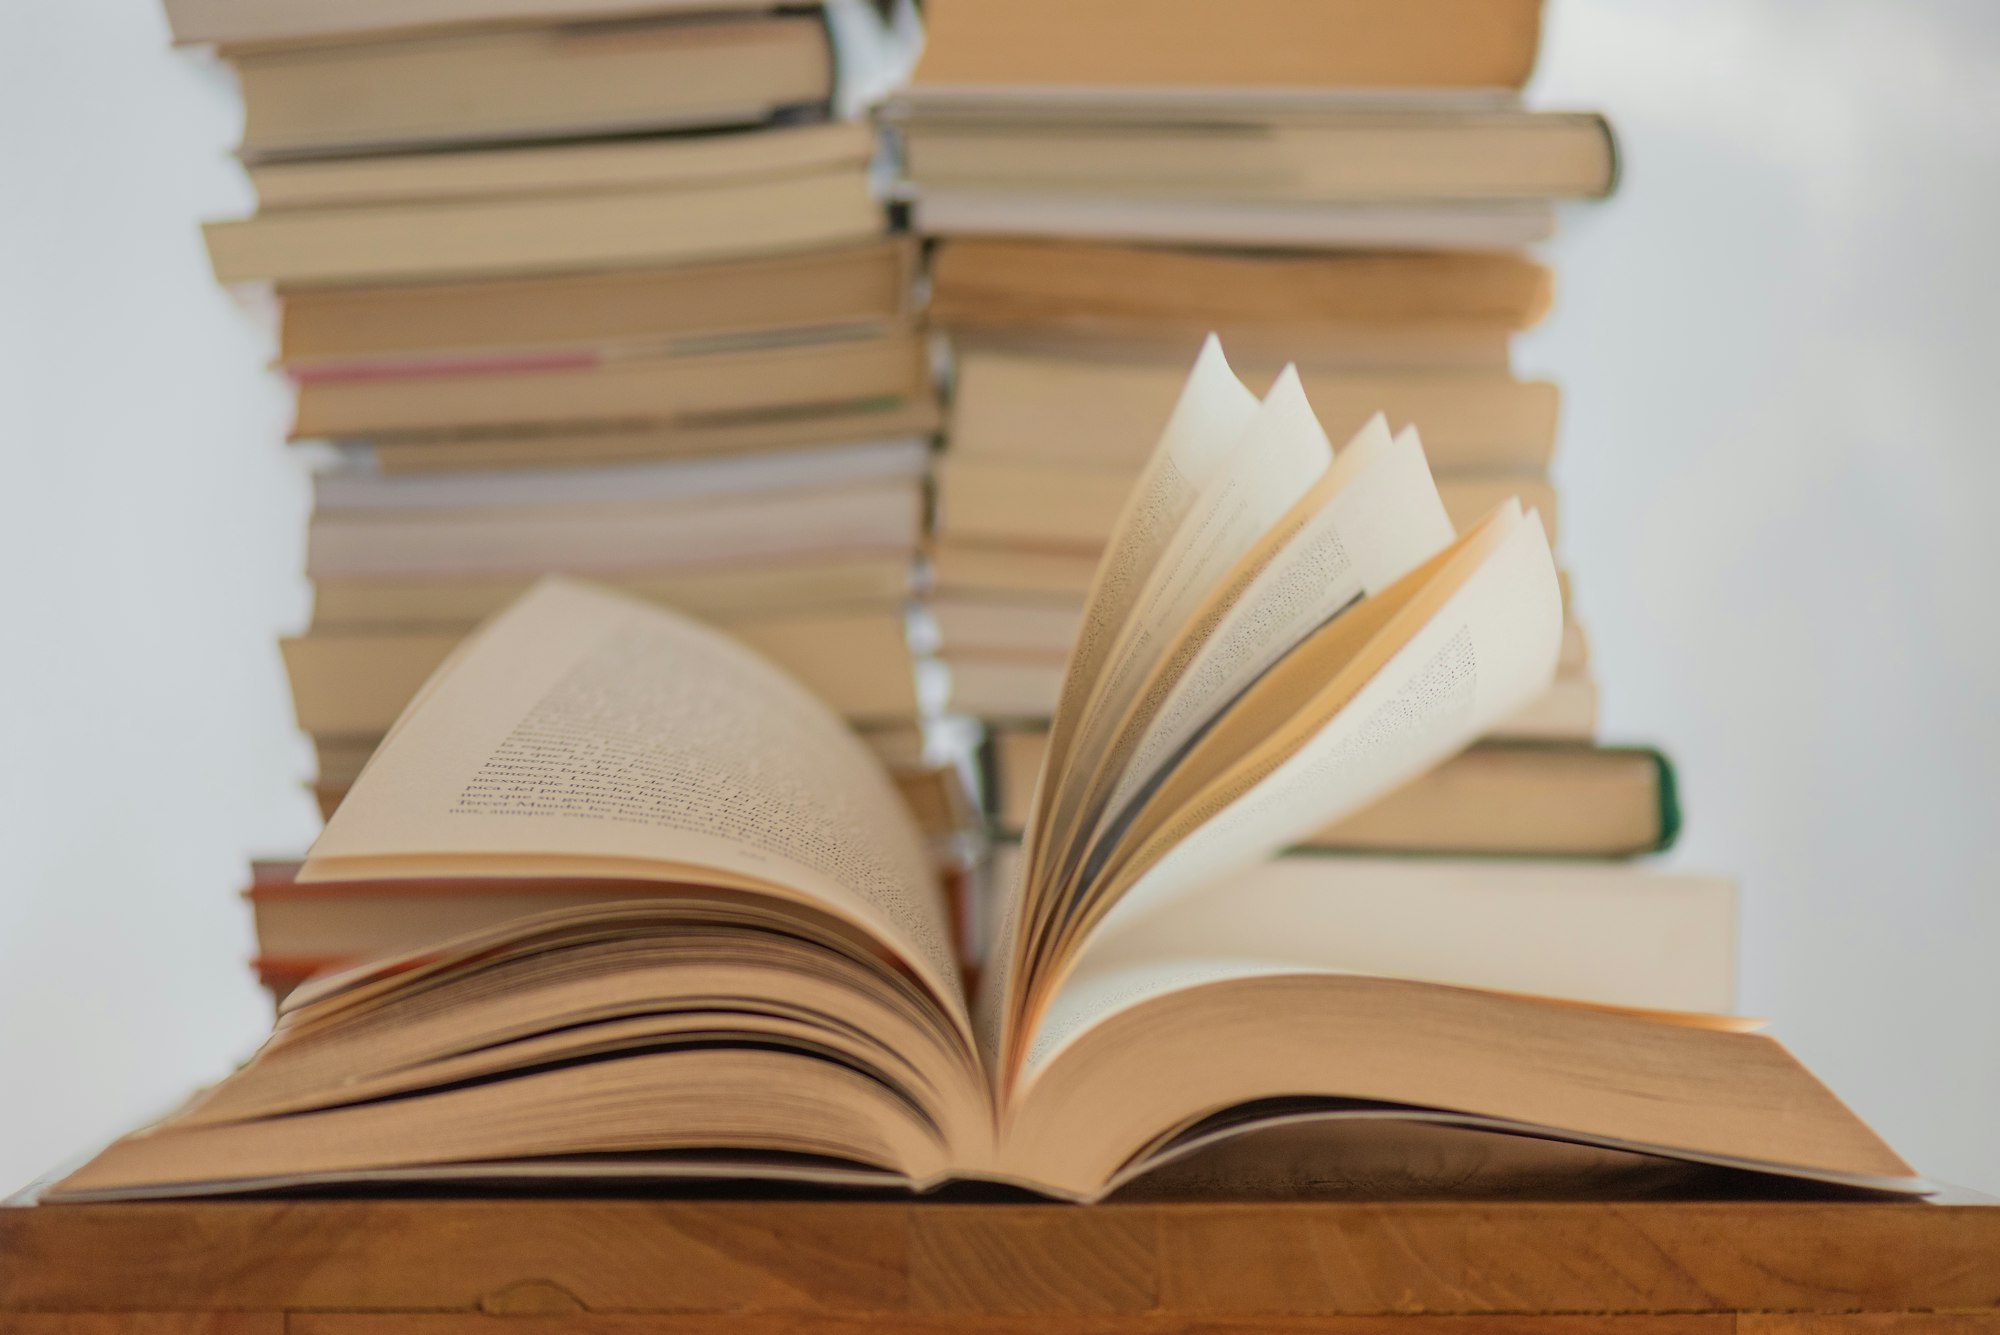 7 Books To Help You Level Up Your Software Engineering Skills